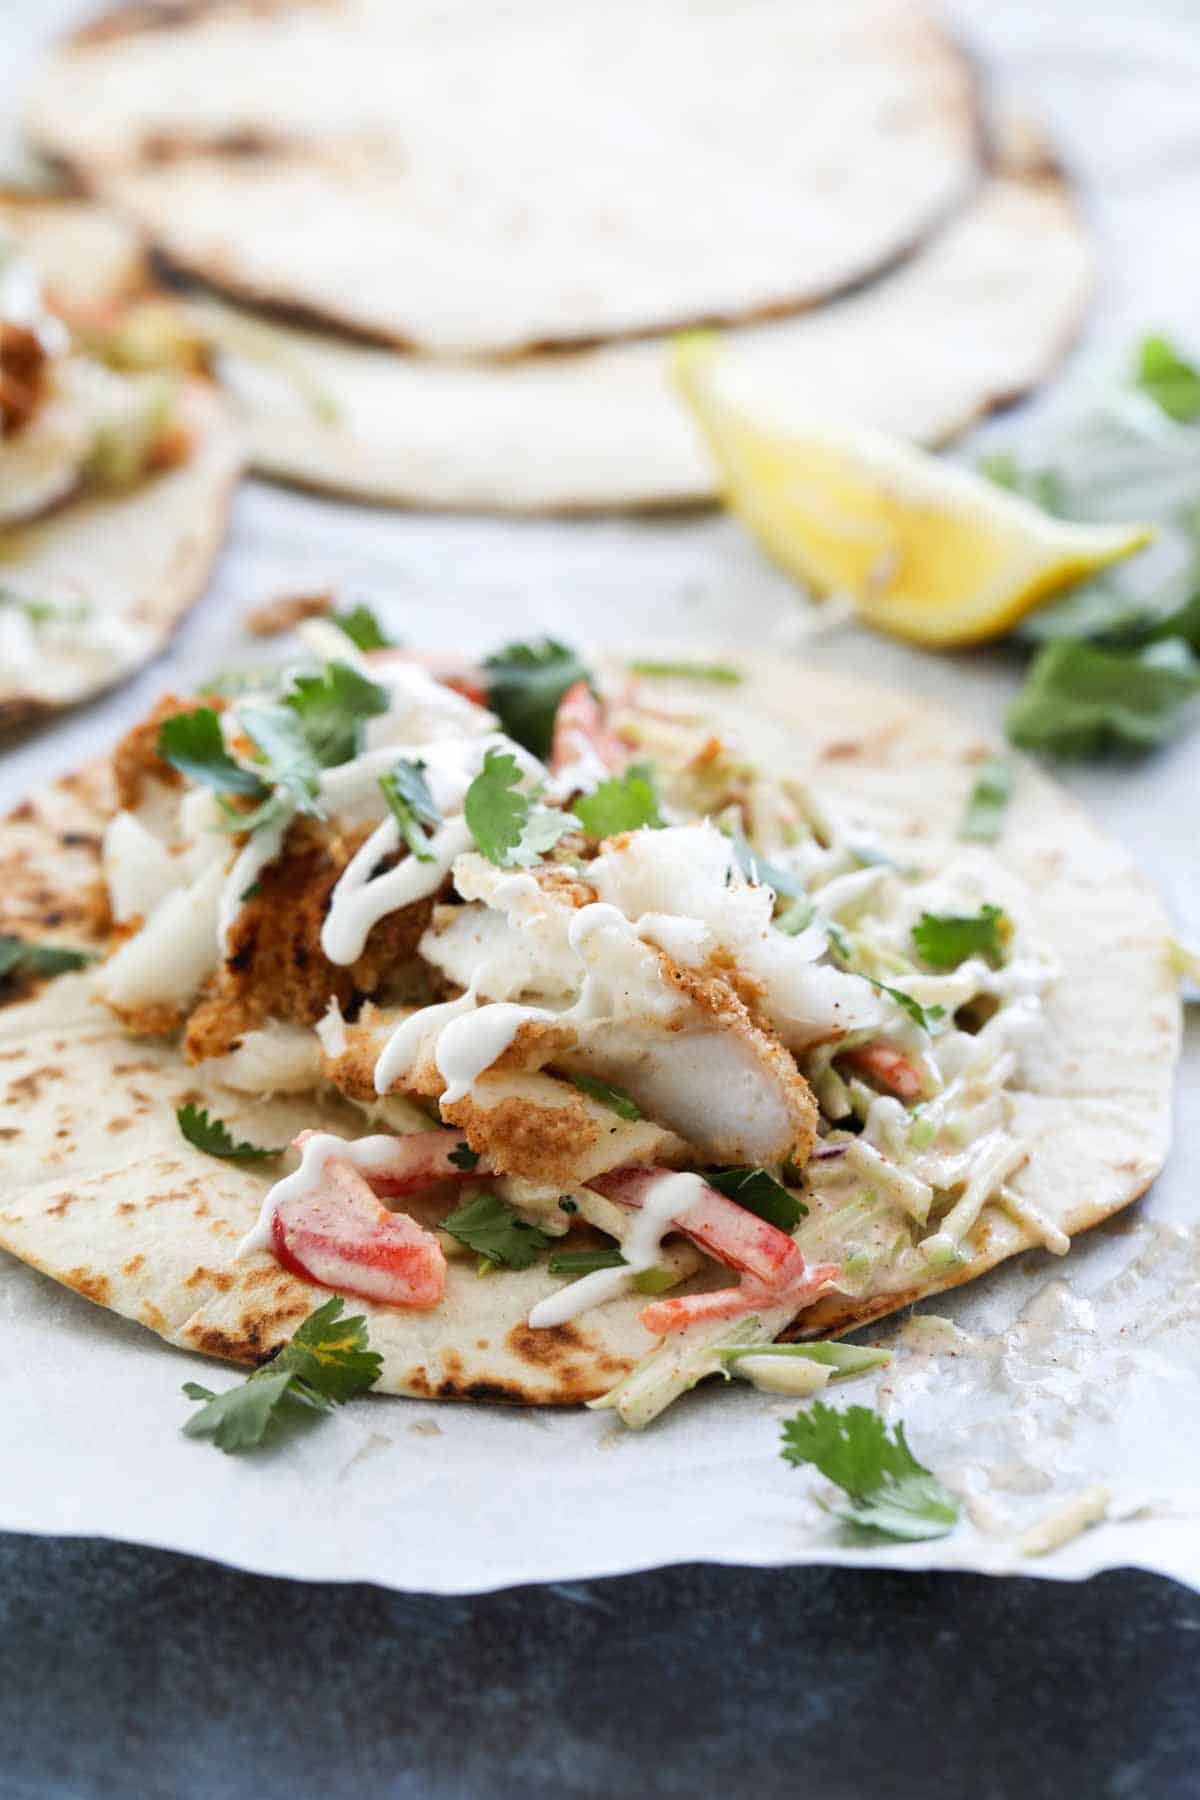 Flour tortillas topped with cajun spiced fish.